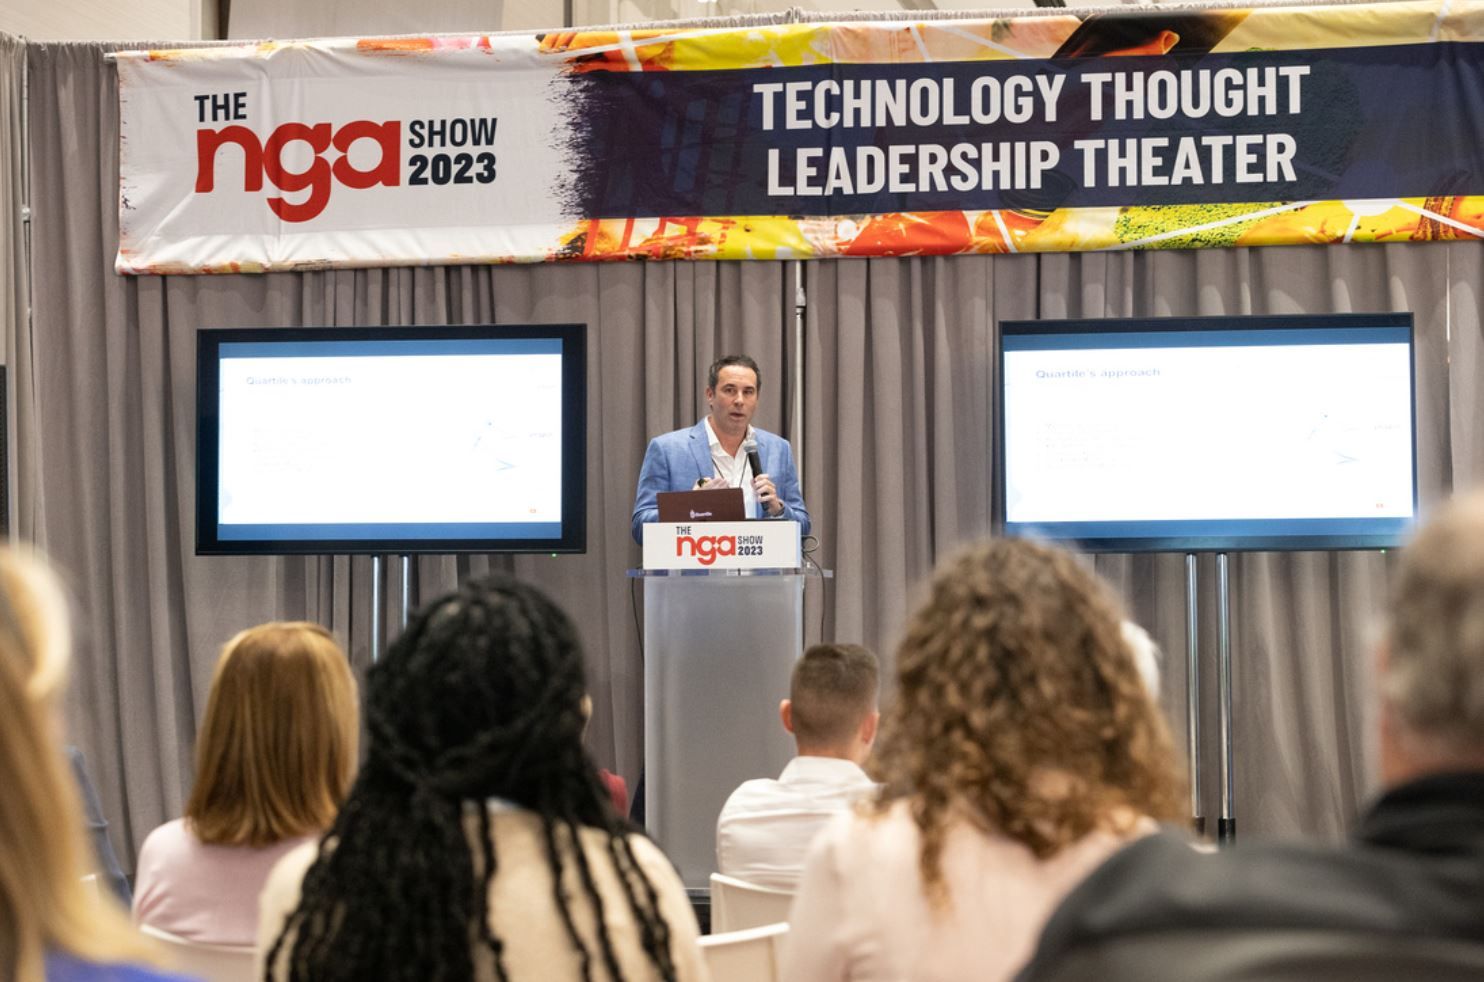 2023 Technology Thought Leadership Theater